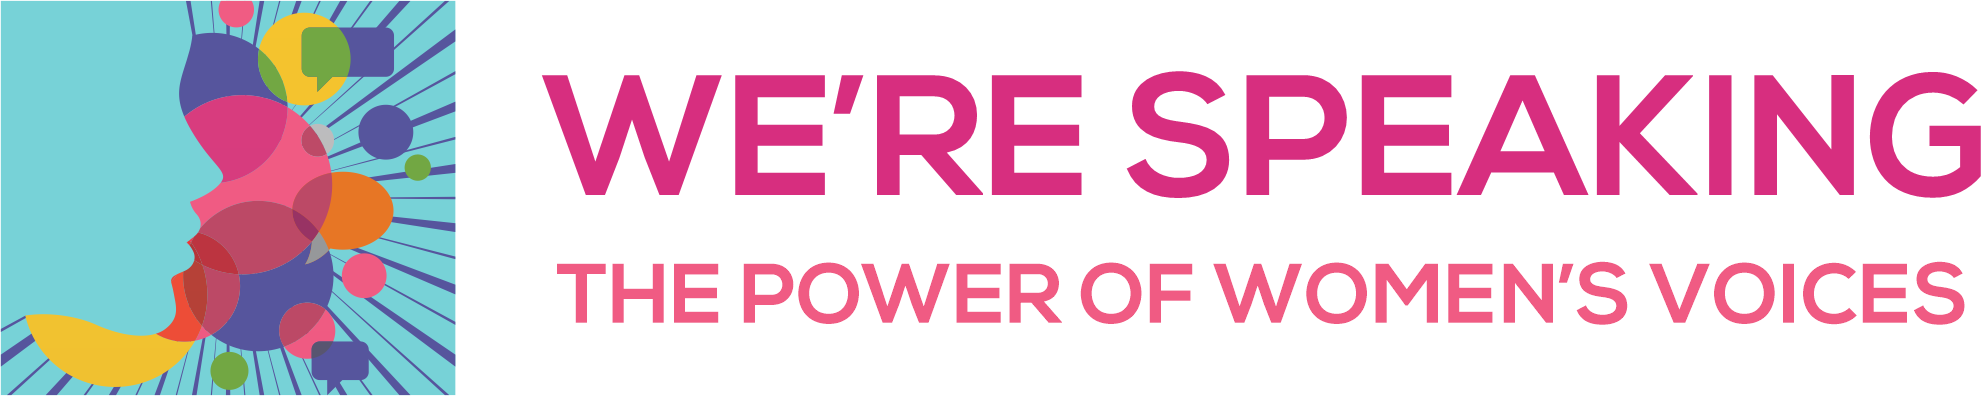 Power Lunch Theme banner: We're Speaking, the Power of Women's Voices. 